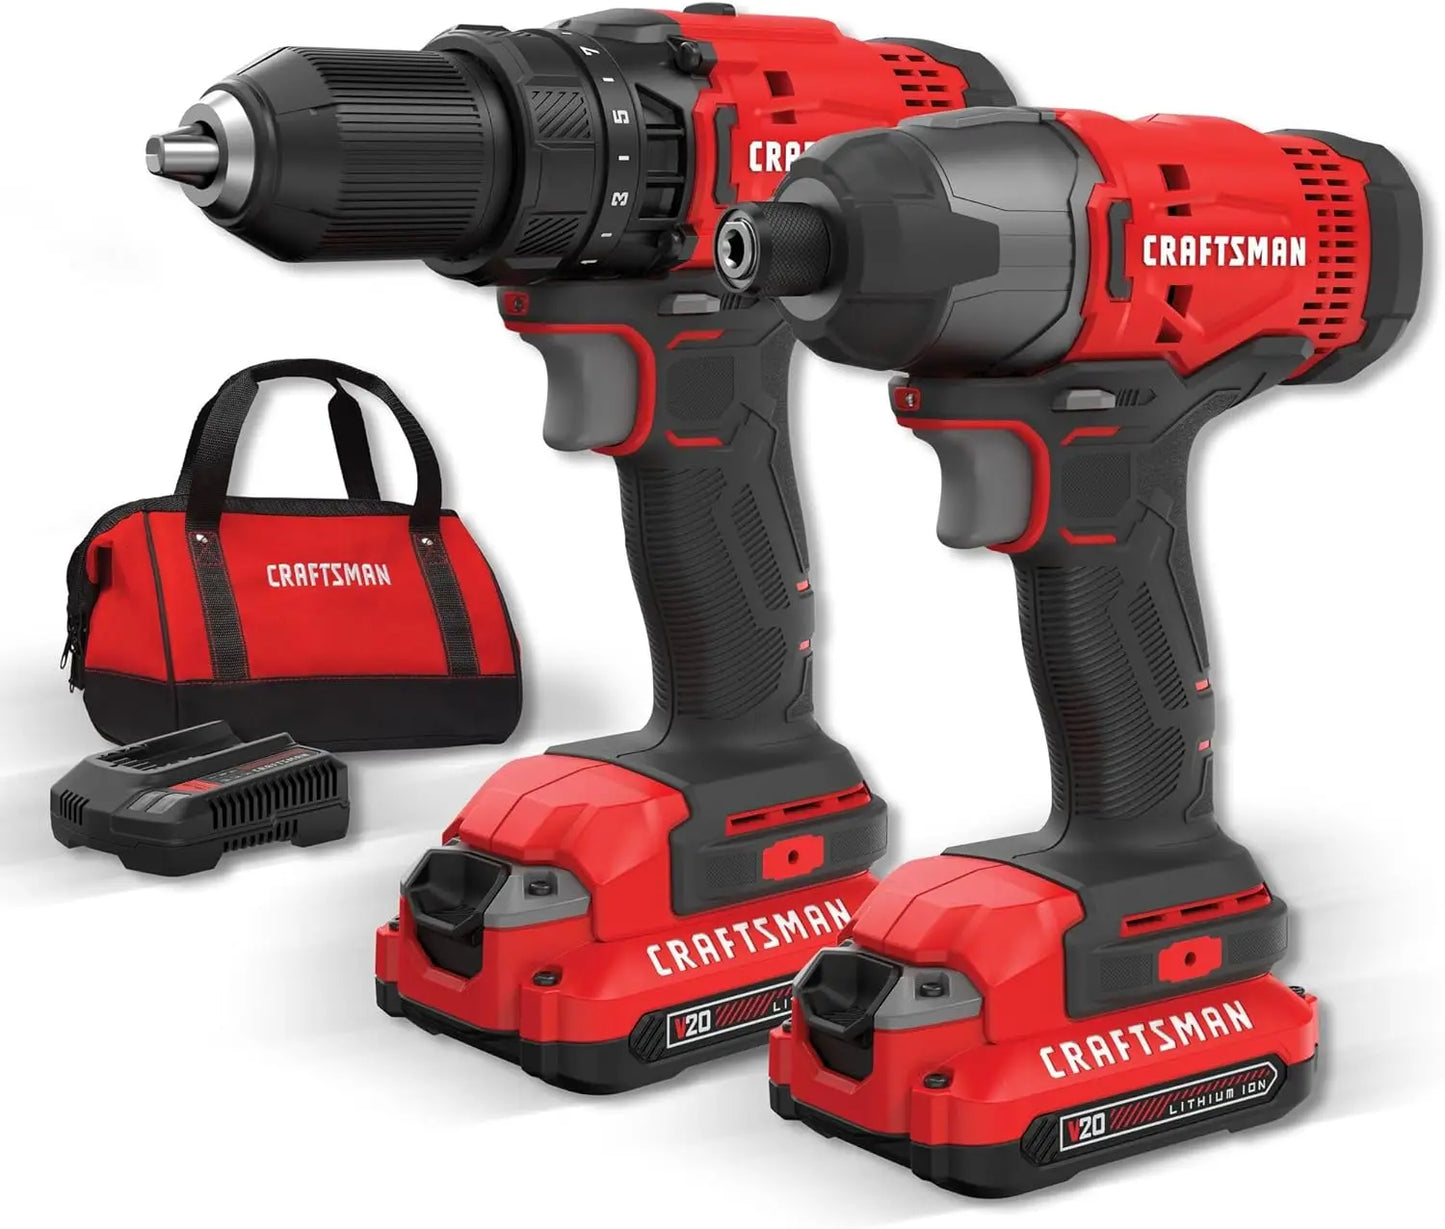 V20 MAX Cordless Drill and Impact Driver, with 2 Batteries and Charger (CMCK200C2AM)